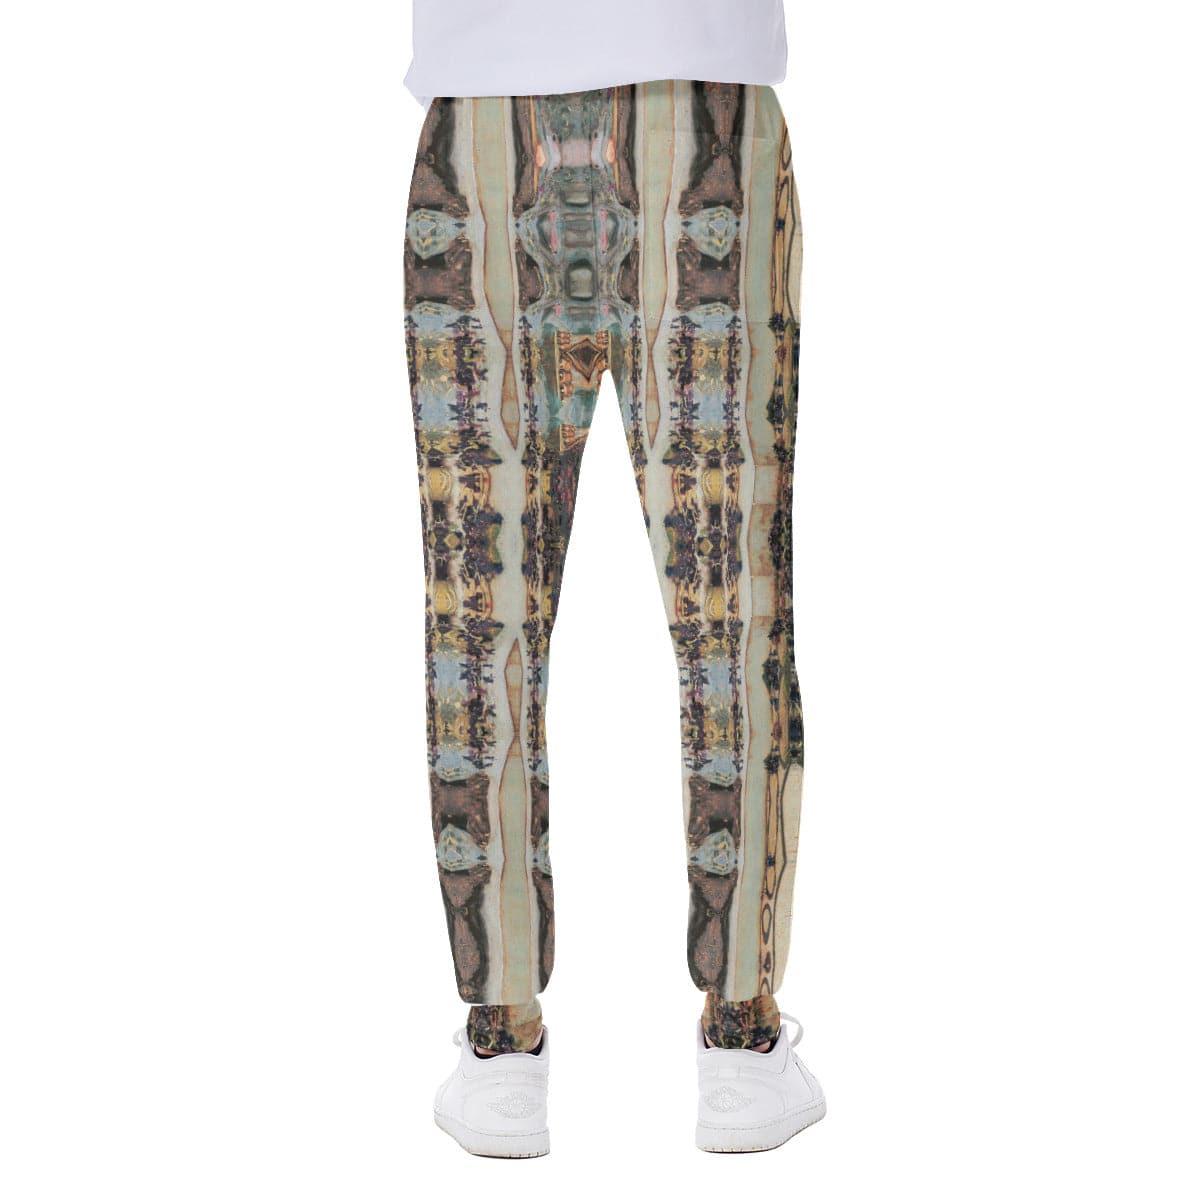 Sand and Olive Pillars patterned  Men's Sports and activity Sweatpants, by Sensus Studio Design